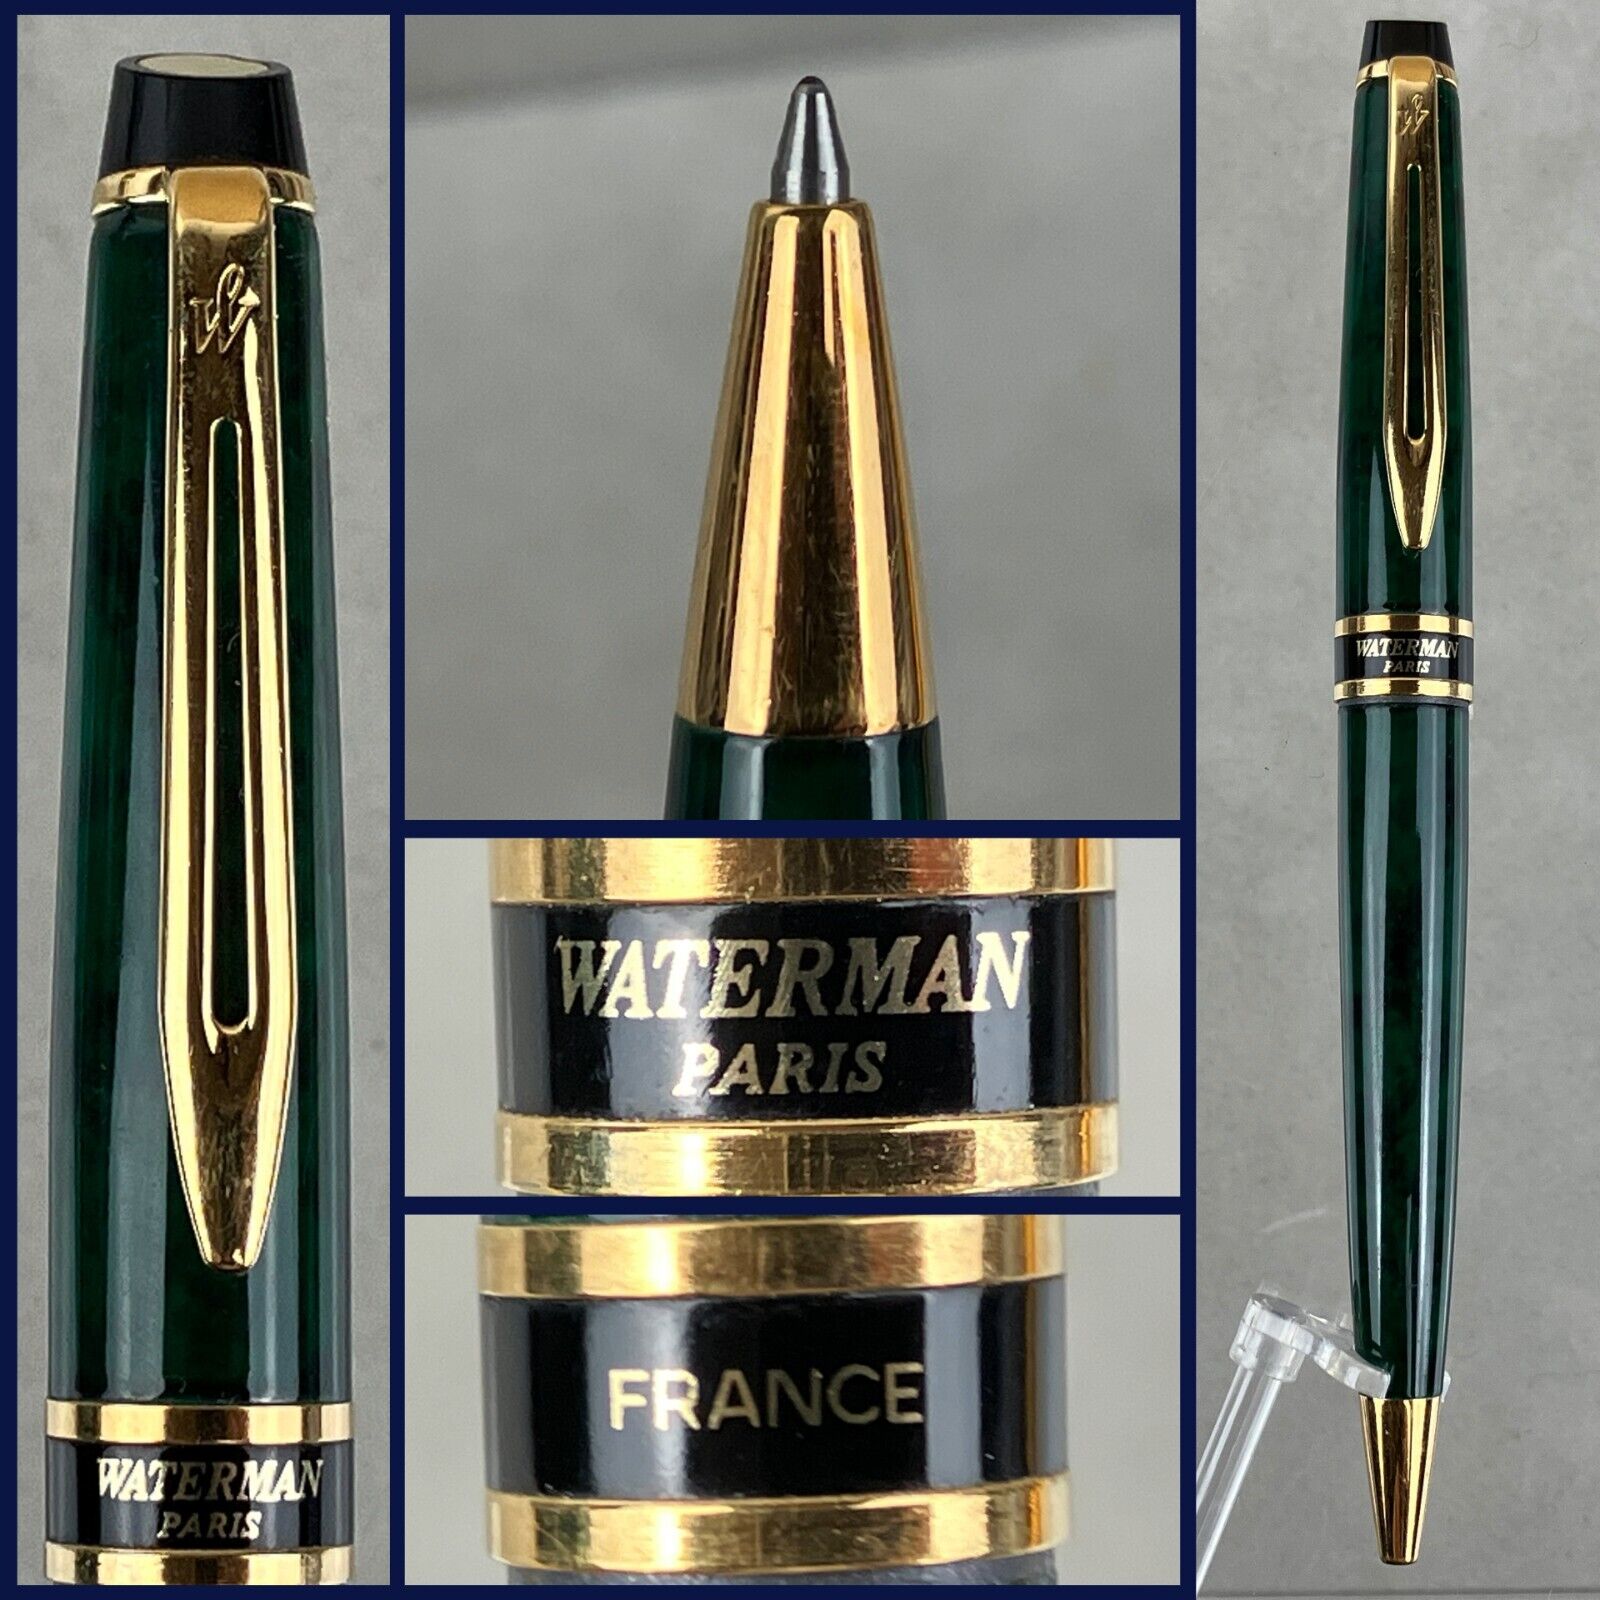 Waterman Expert Marbled Green & Gold Tone Ballpoint Twist Pen Made in France